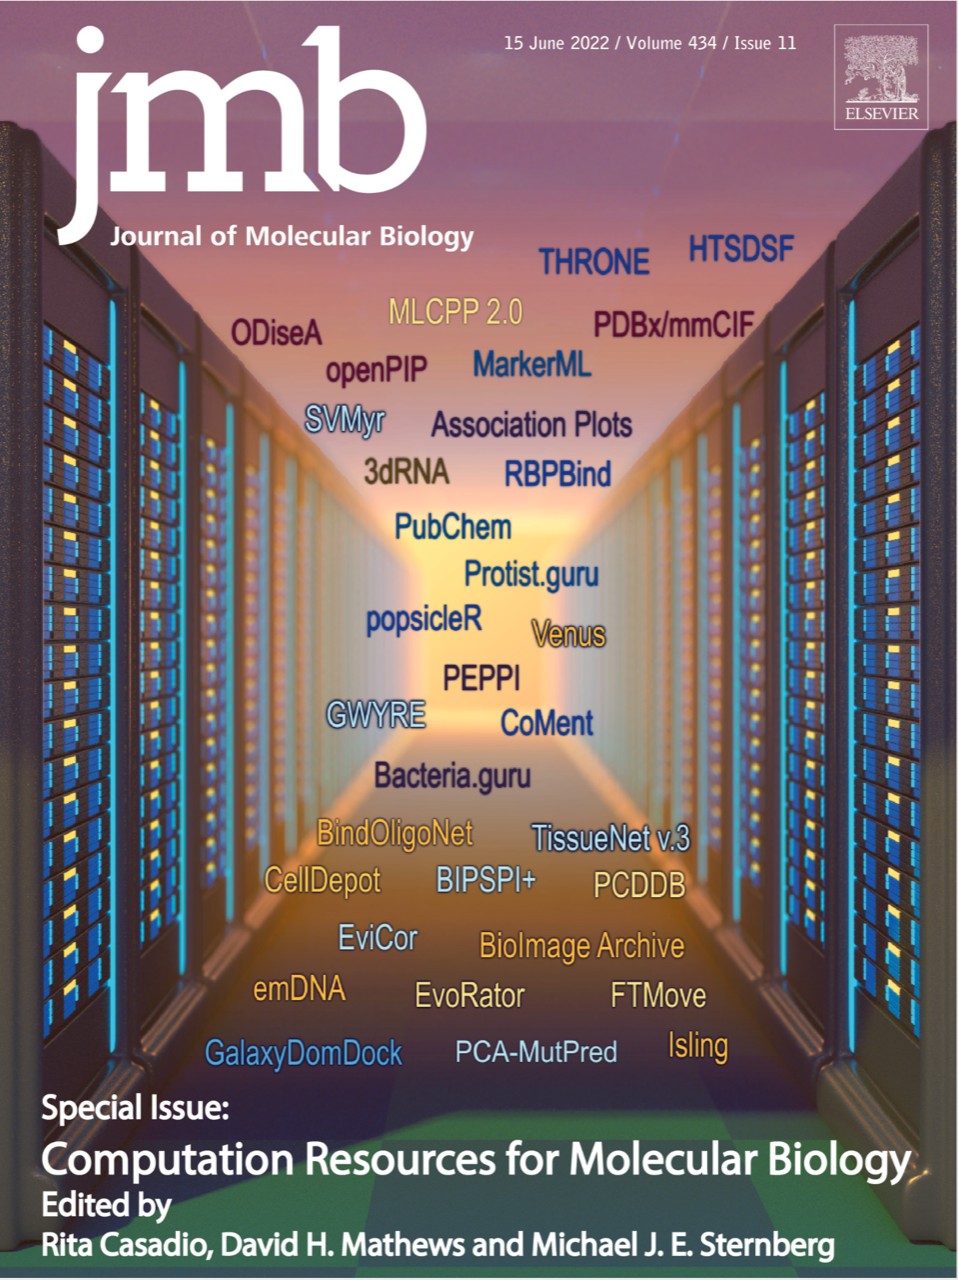 An article on the PDBx/mmCIF Ecosystem is part of the <I>Journal of Molecular Biology